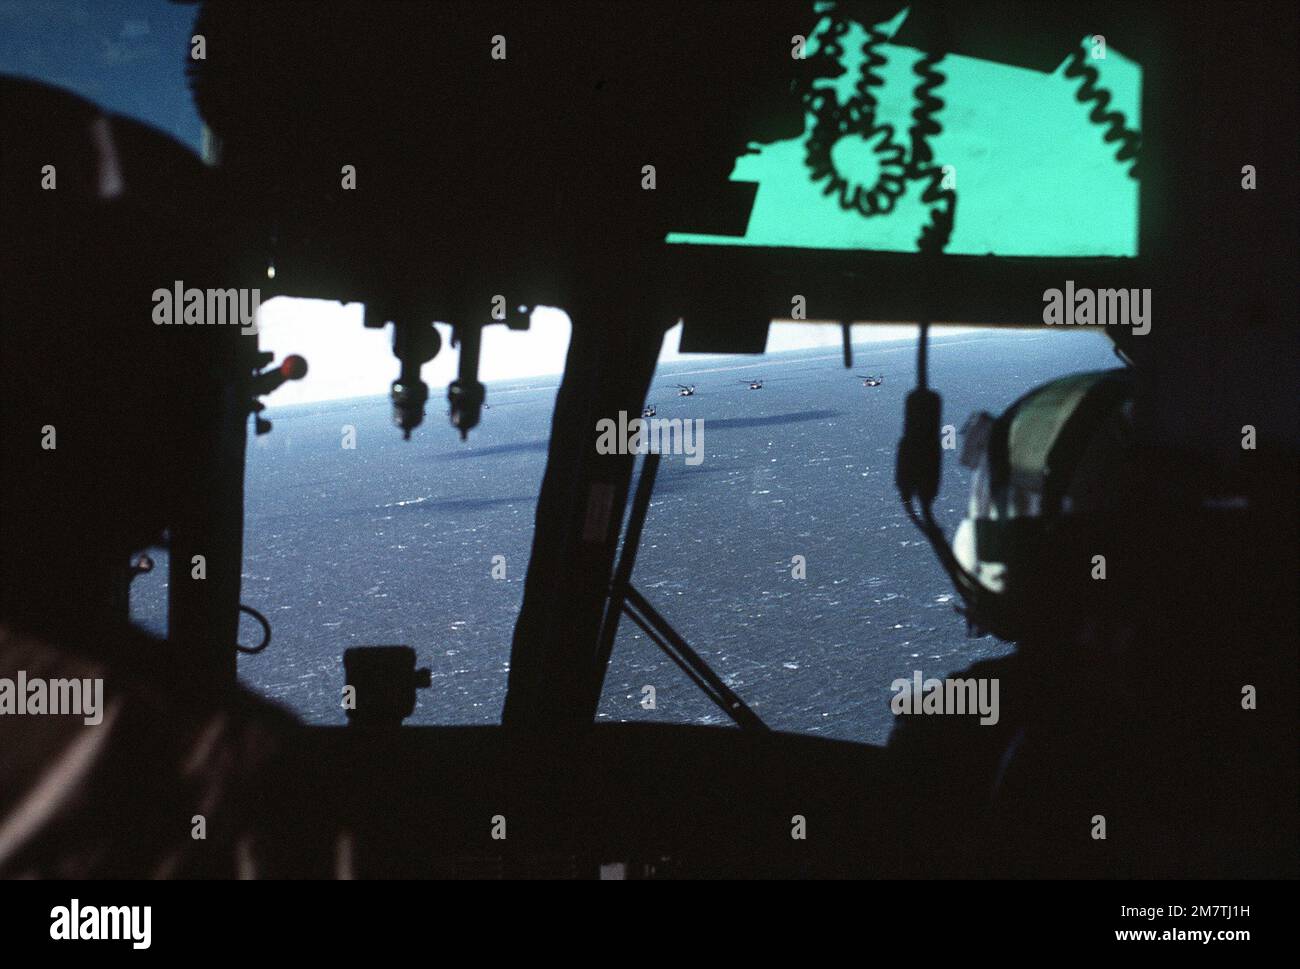 In-flight RH-53D Sea Stallion helicopters as seen from the cockpit of an SH-3 Sea King helicopter during search and rescue (SAR) operations. Country: Chesapeake Bay Stock Photo